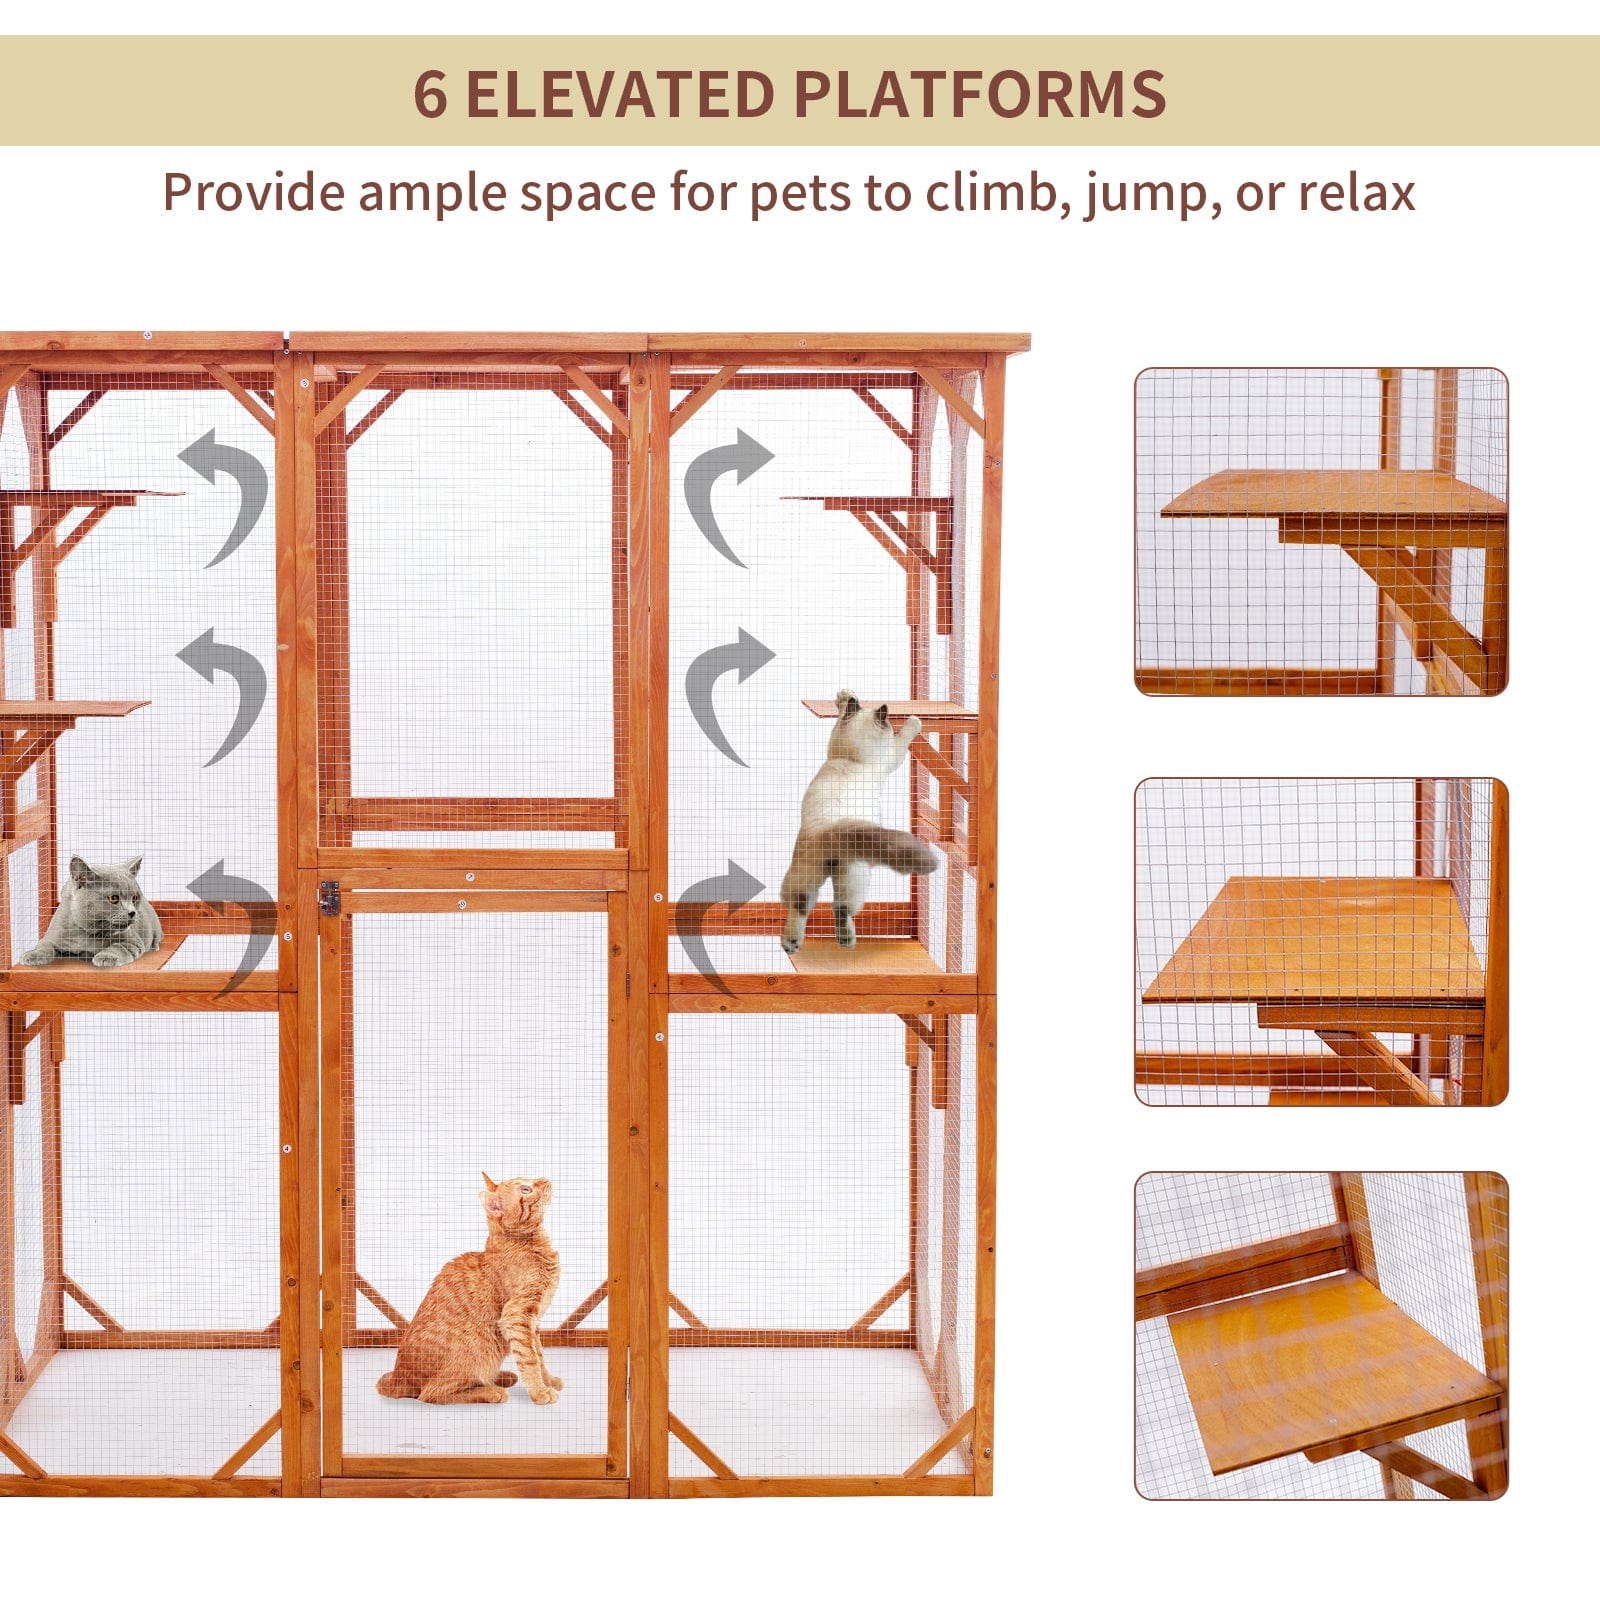 Elecwish Large Cat House Catio Outdoor Cat Enclosure has 6 elevated platforms